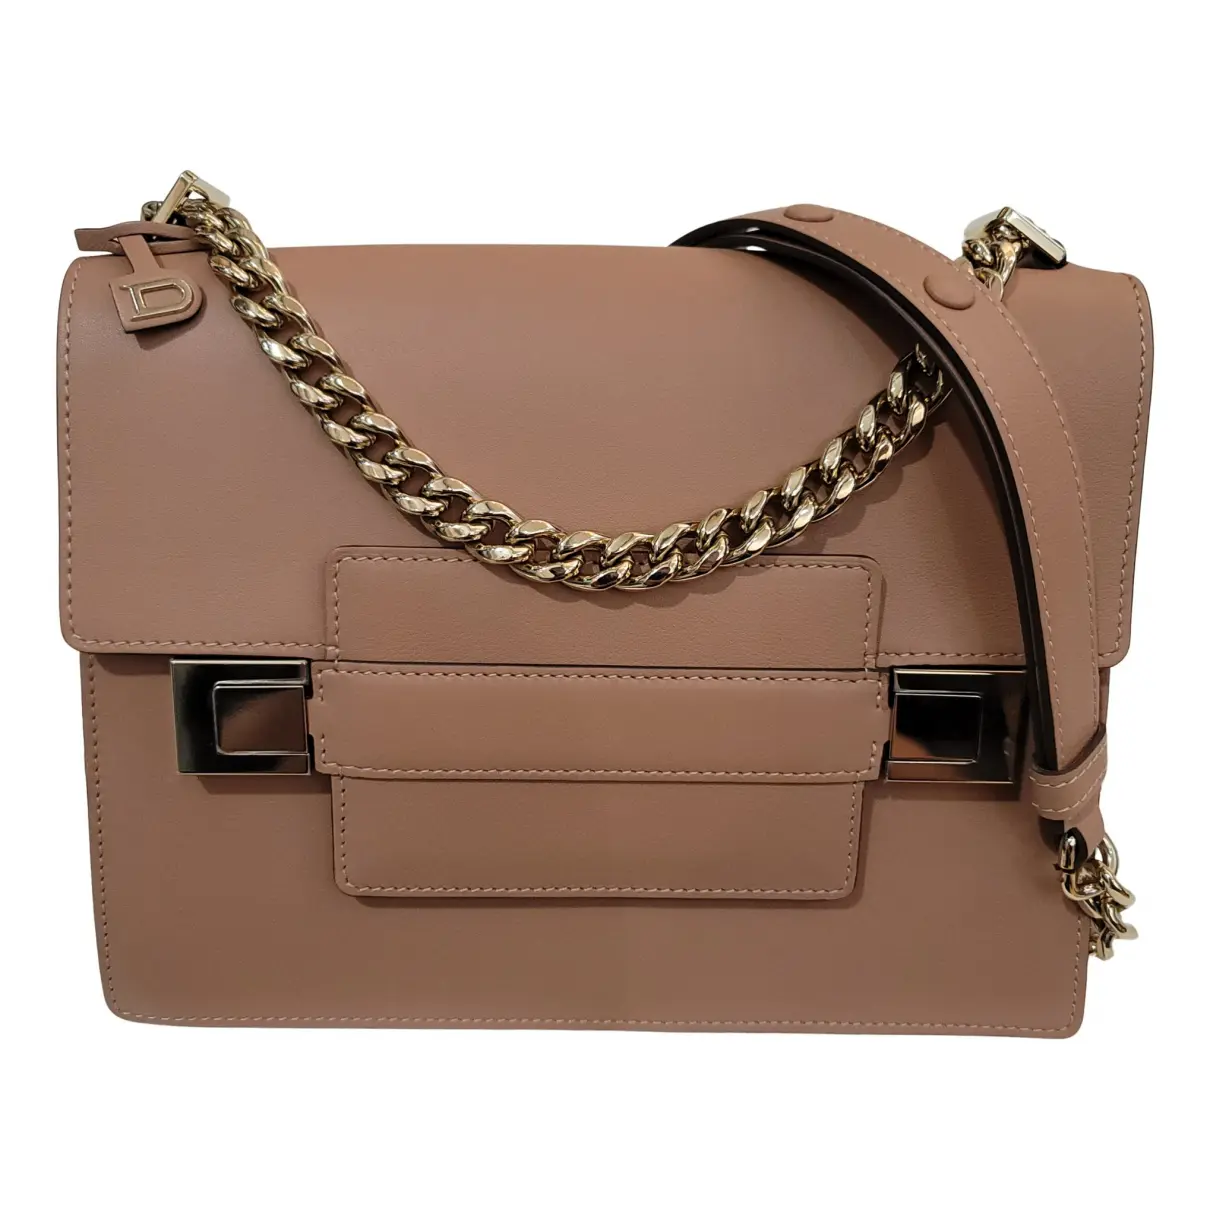 Madame leather crossbody bag Delvaux